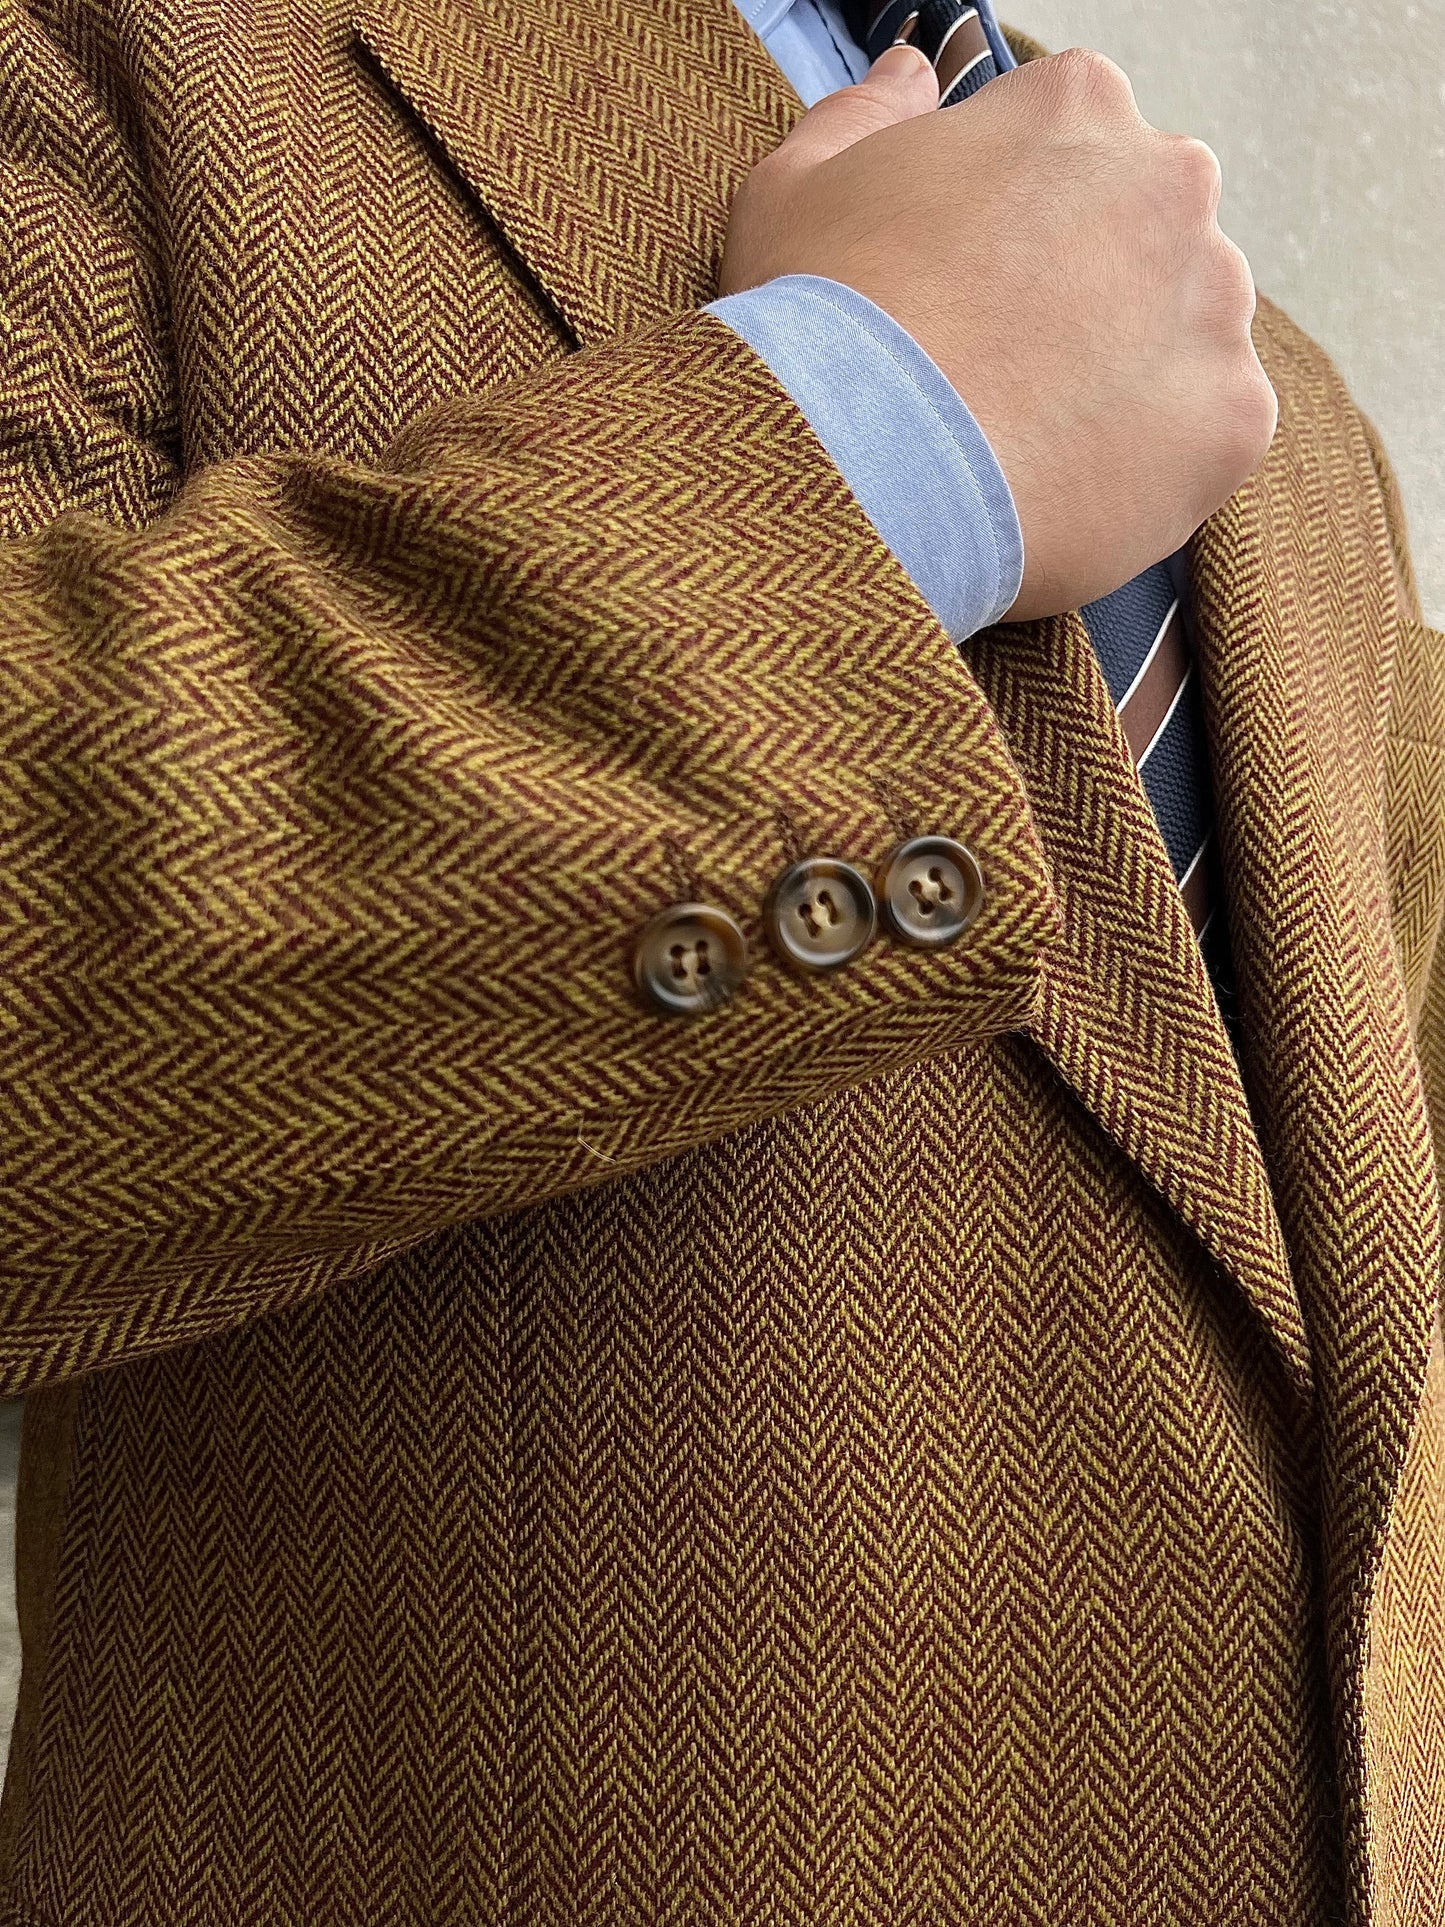 Giacca in tweed anni ‘80 tg. 52-54